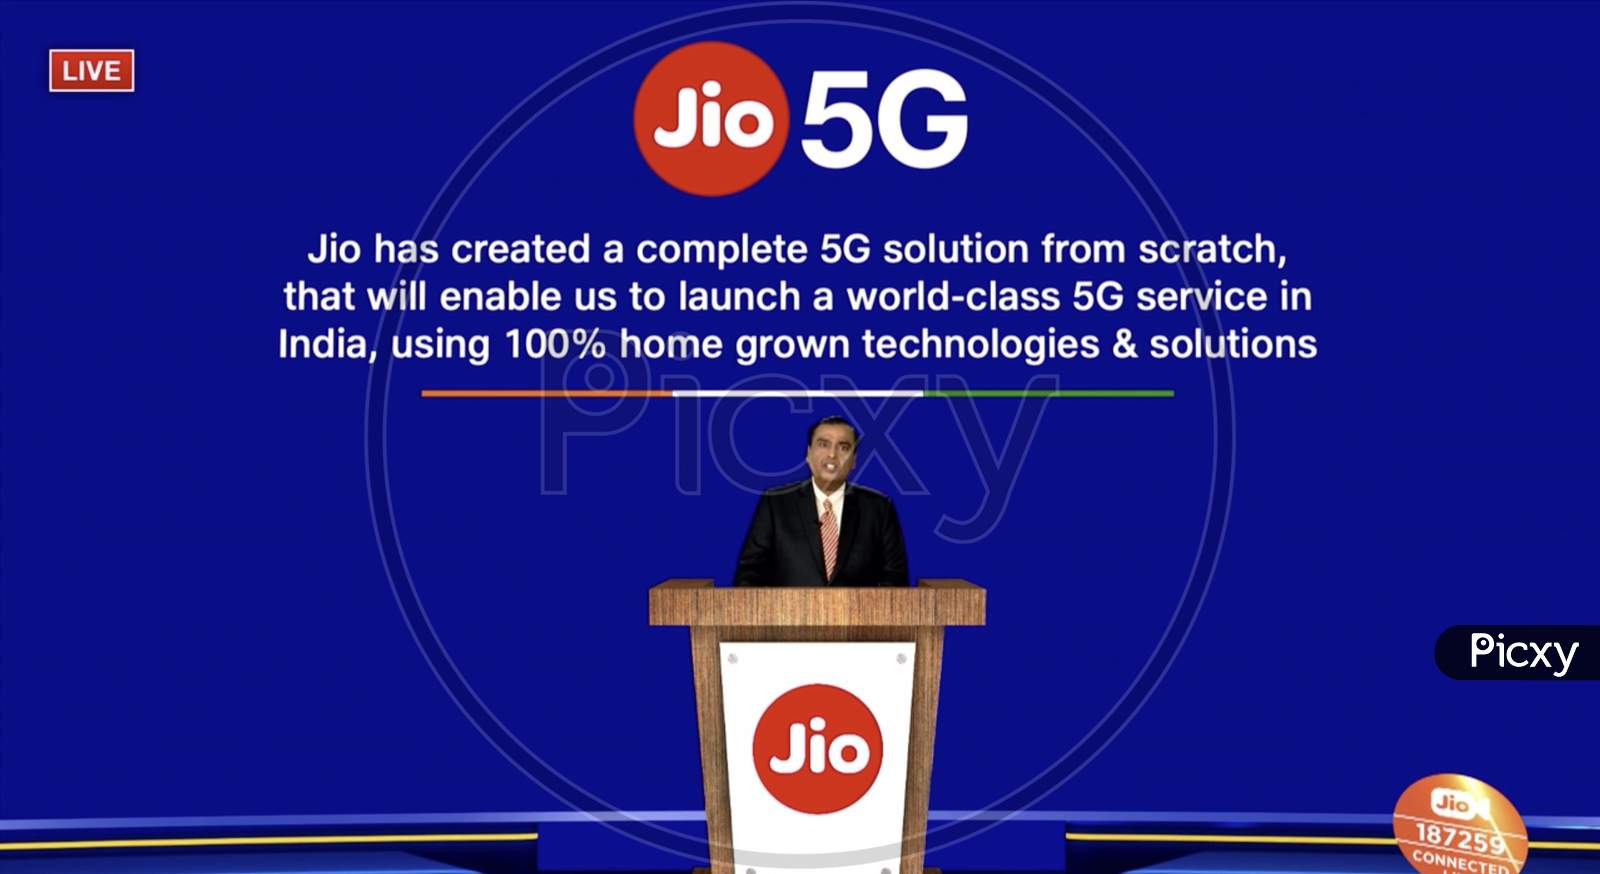 Mukesh Ambani announces Made in India Jio 5G technology in live at Reliance Annual General Meeting for shareholders.